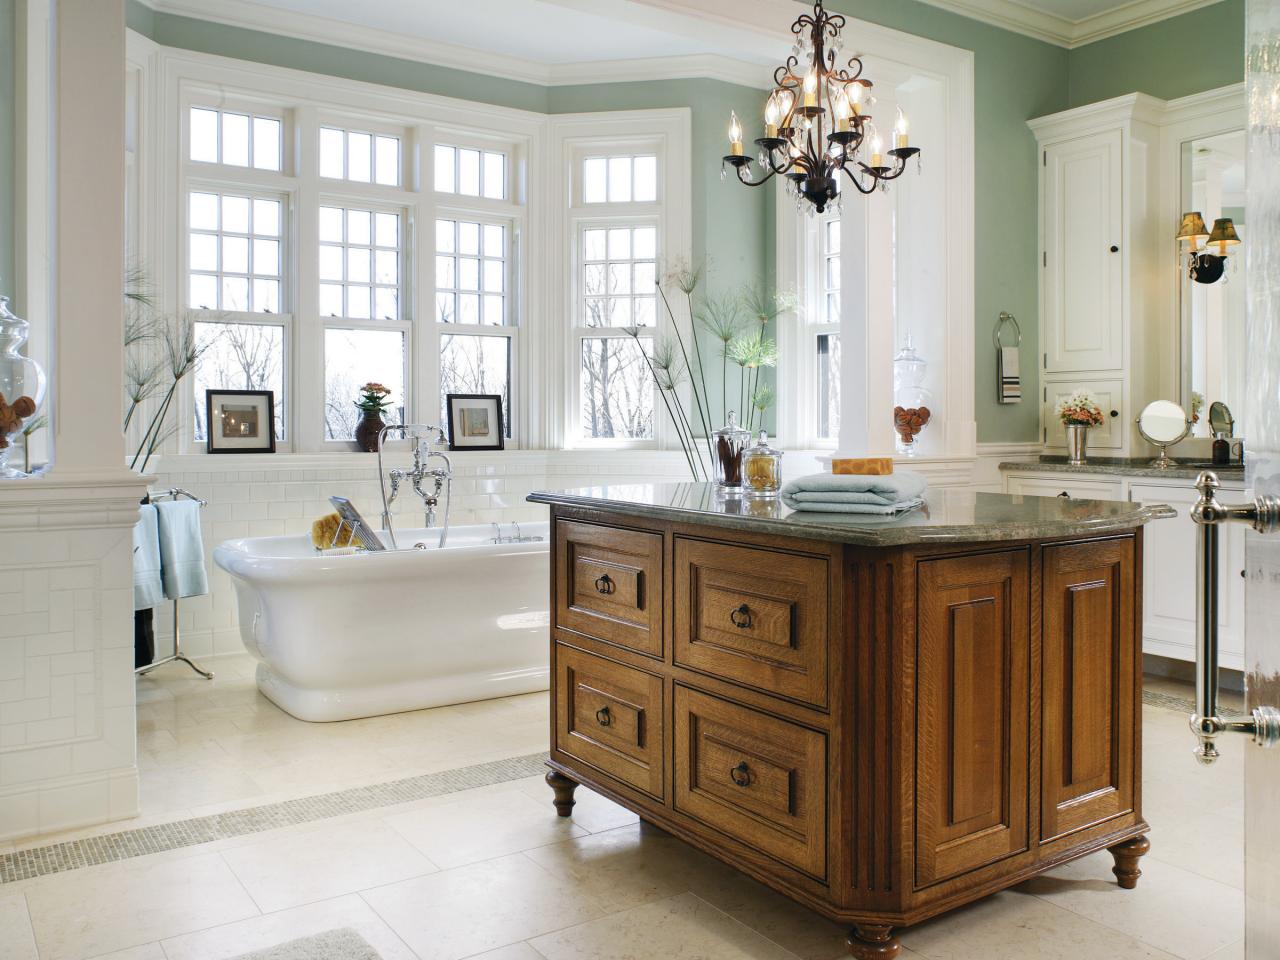 bathroom decorating tips & ideas + pictures from hgtv | hgtv